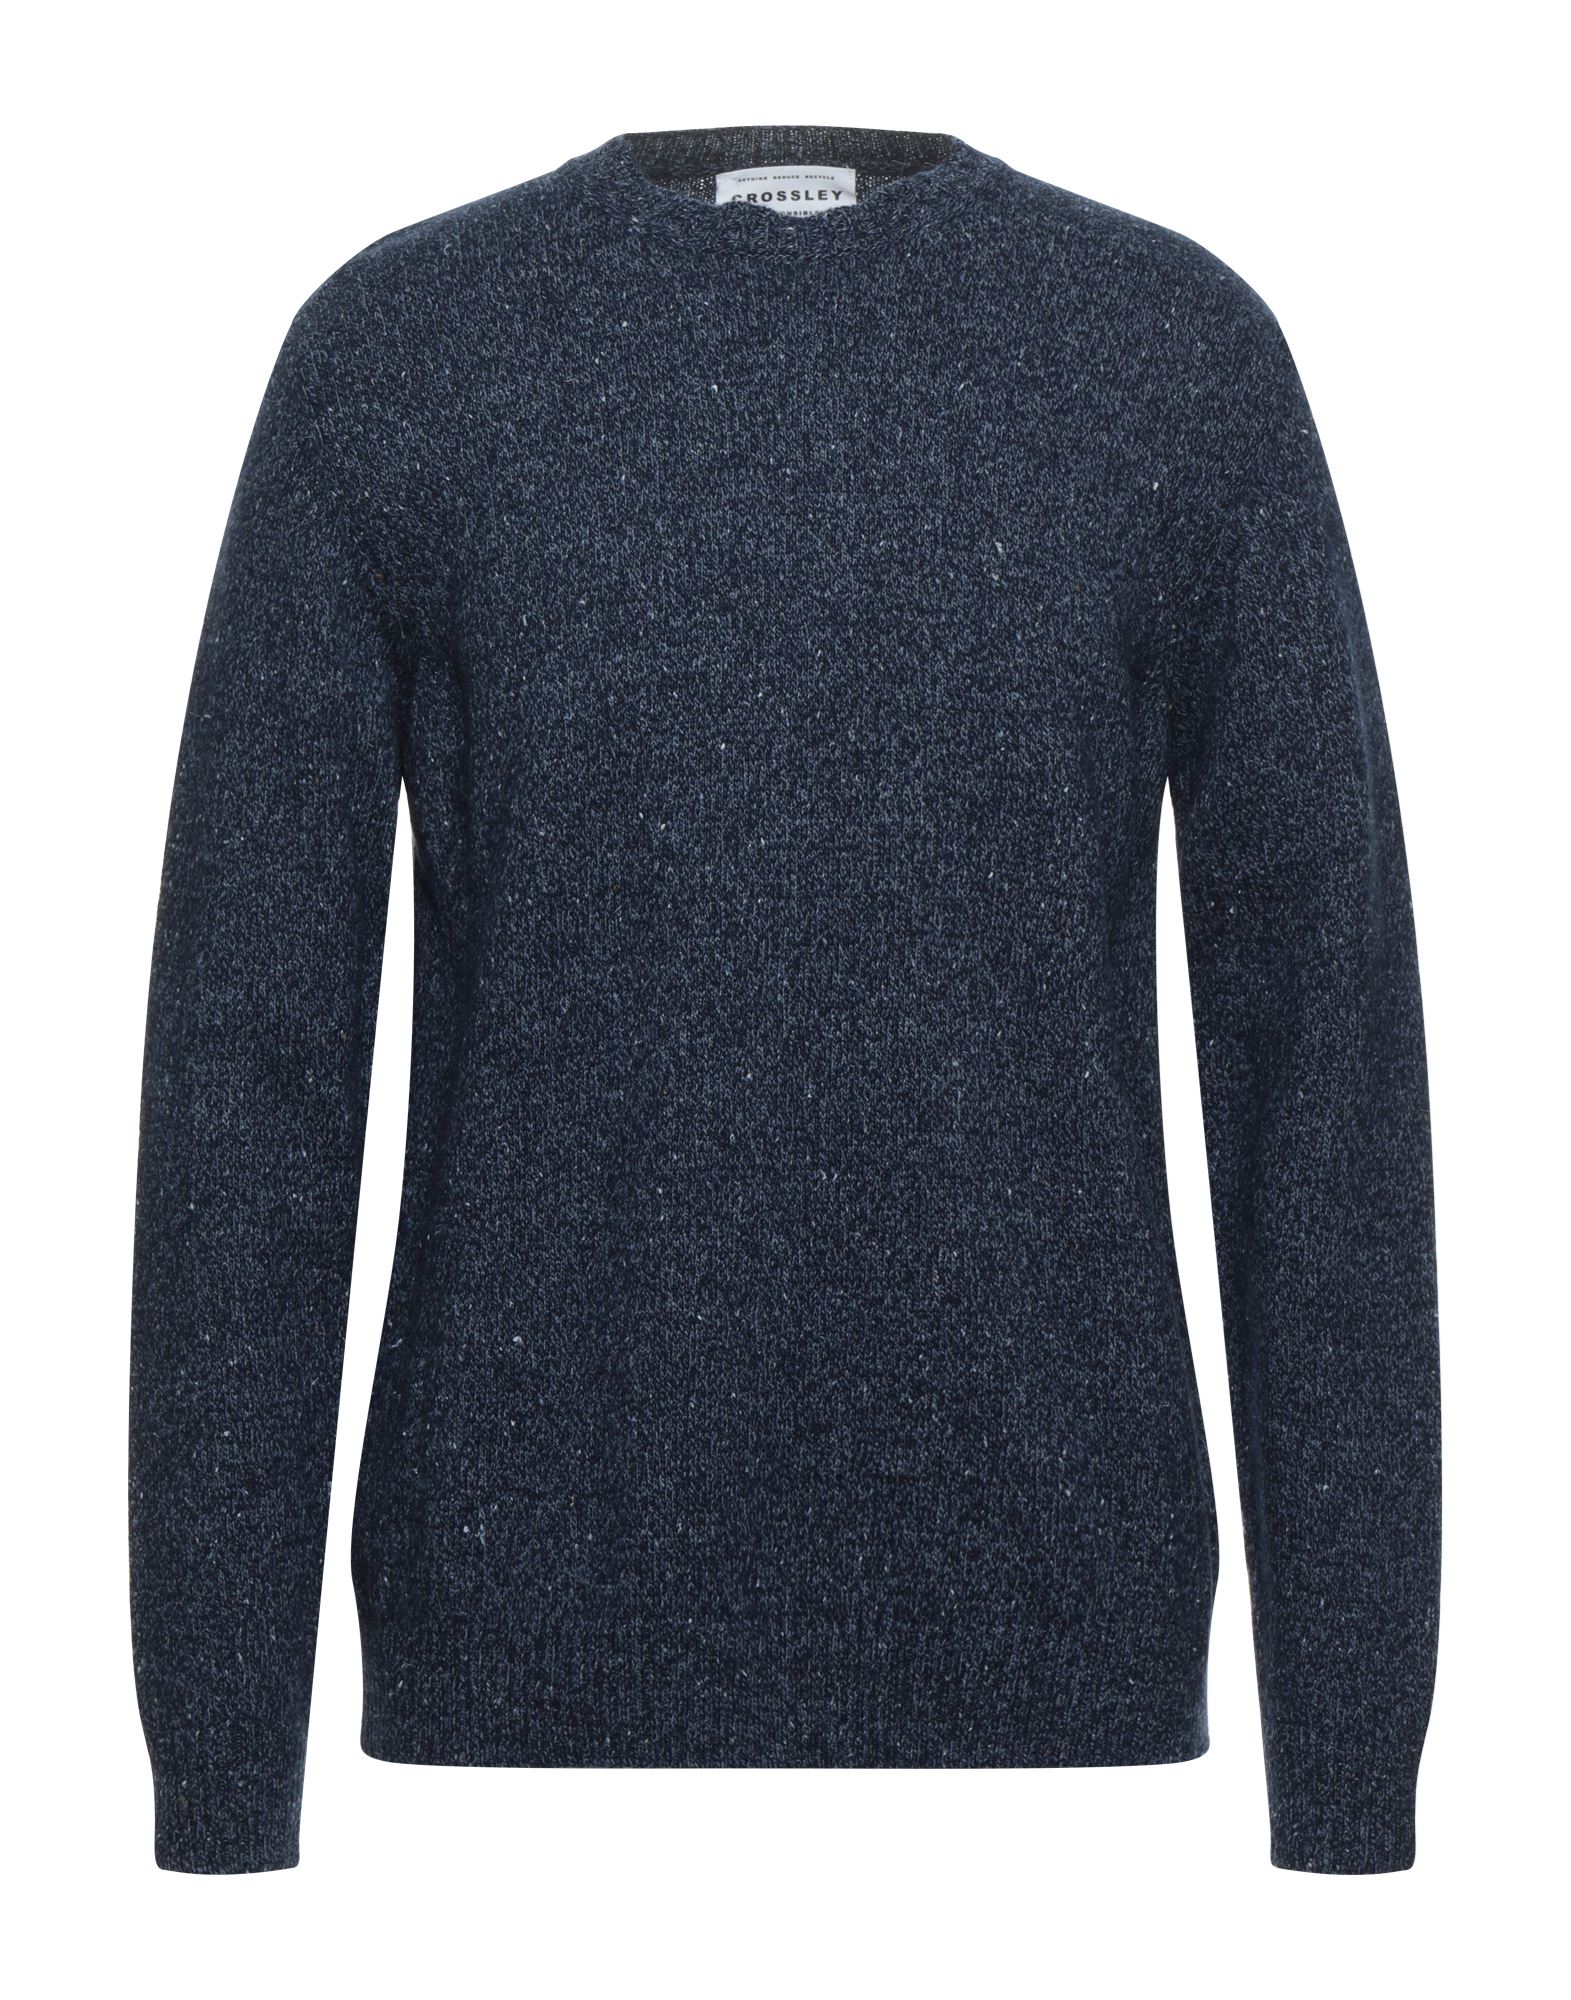 Crossley Man Sweater Midnight Blue Size S Cotton, Cashmere